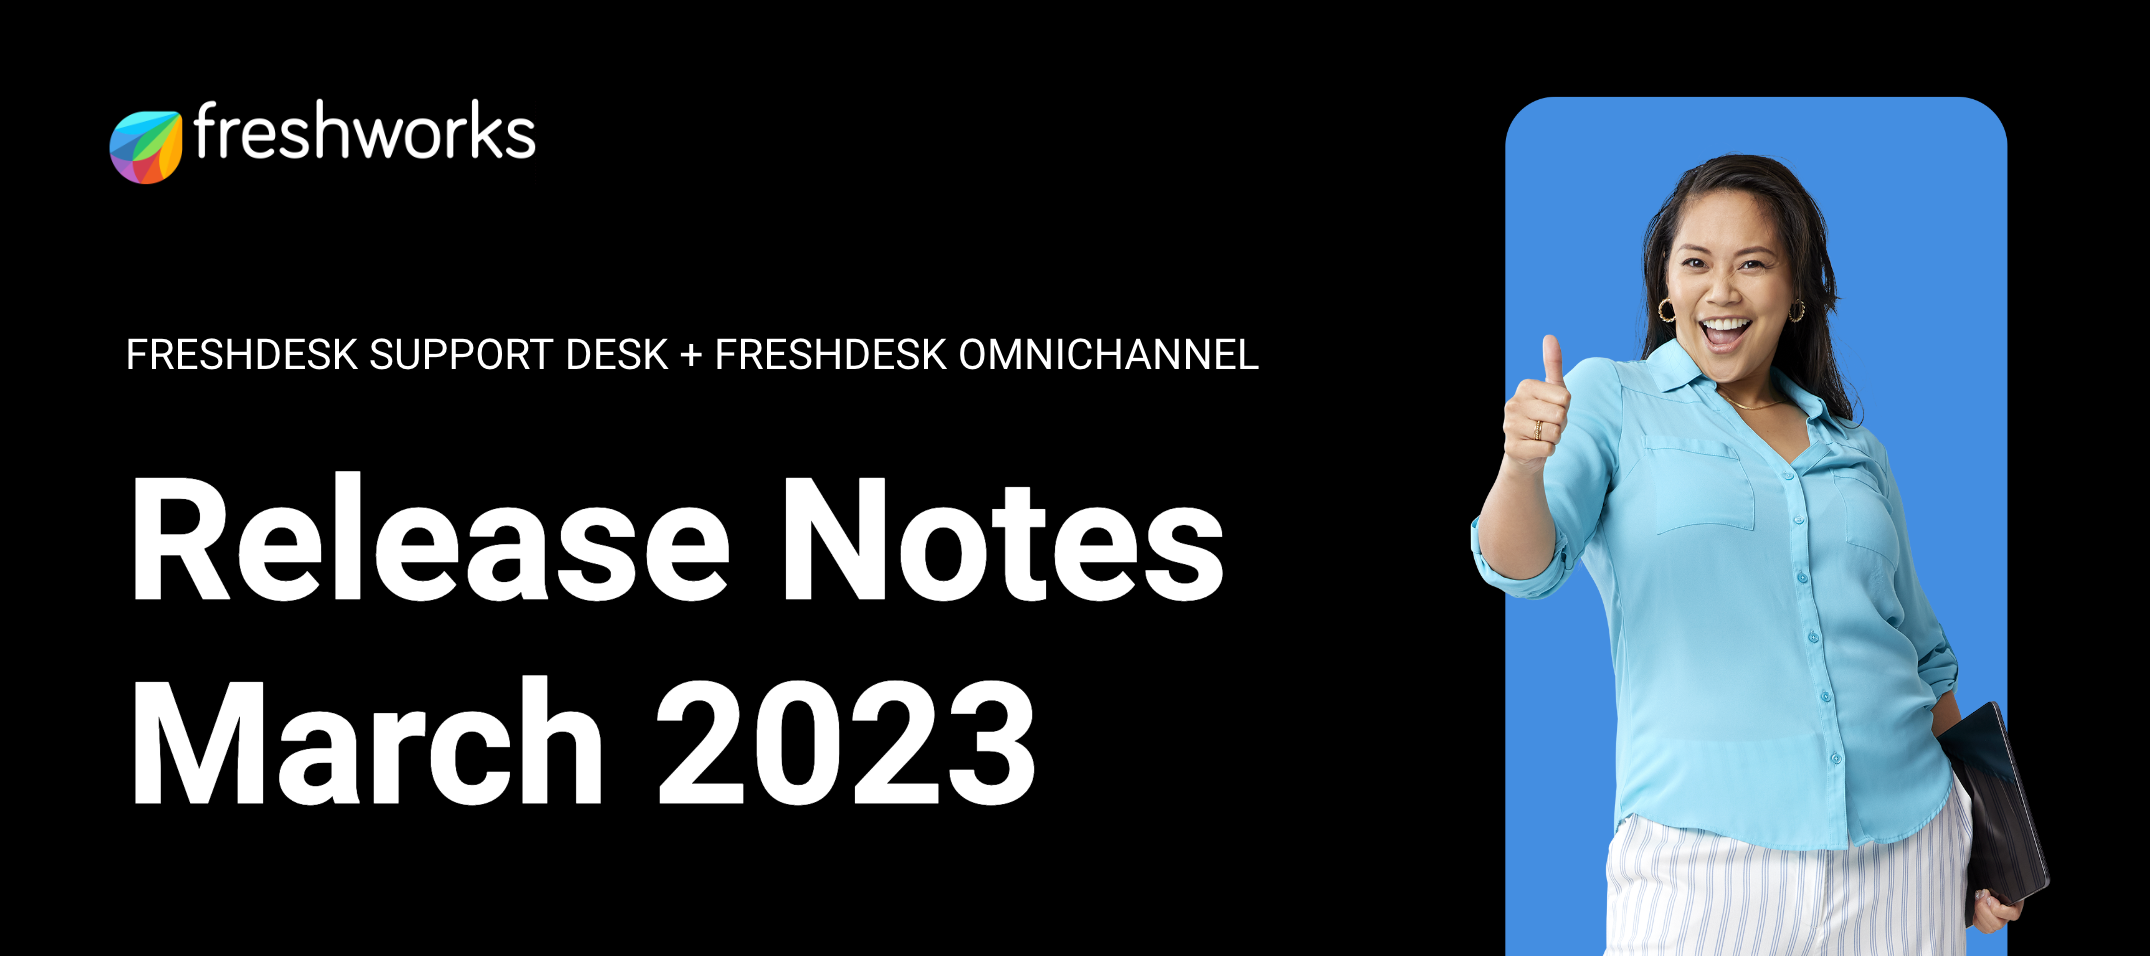 Freshdesk Release Notes - March 2023